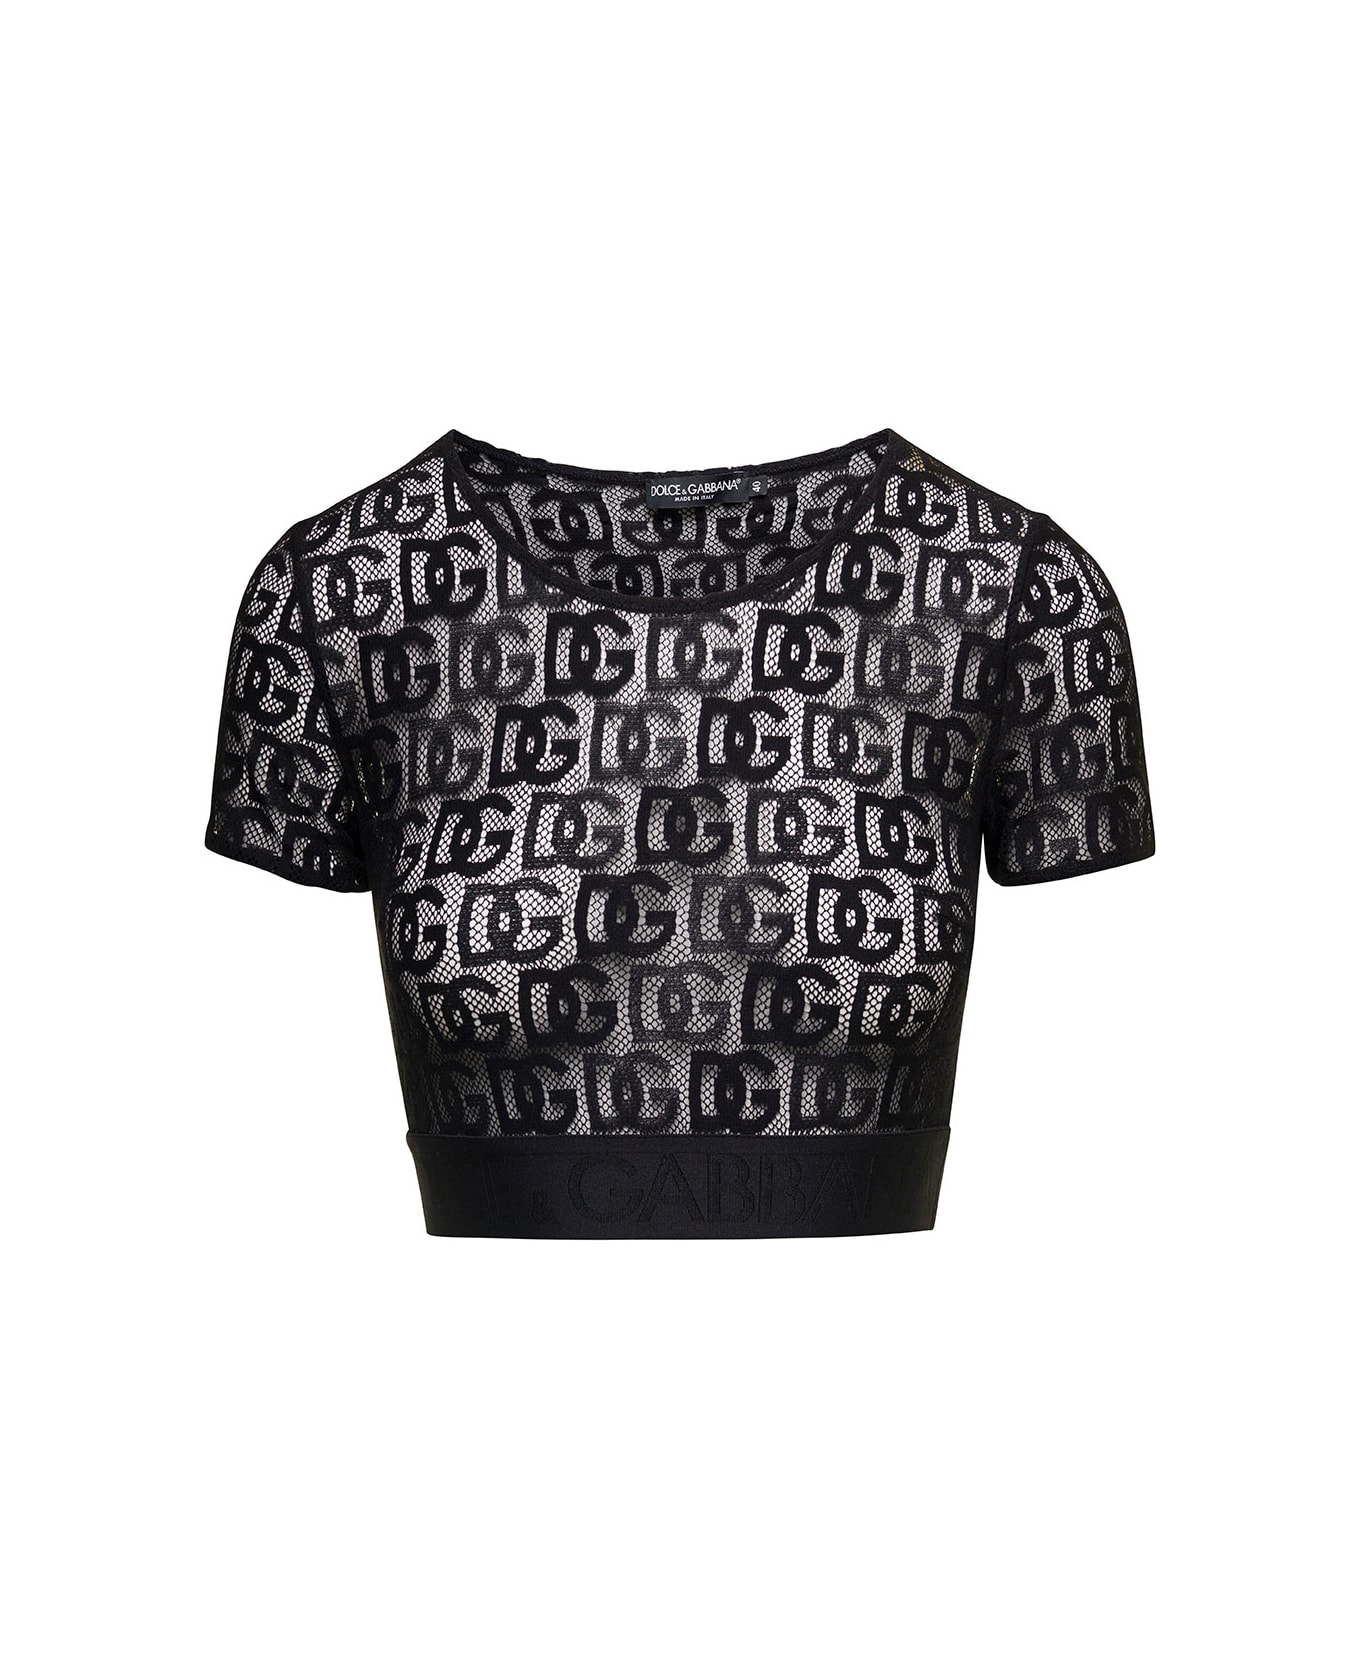 Dolce & Gabbana Black Crew Neck Cropped Top With Dg Logo All-over  In Cotton Blend Woman - Black